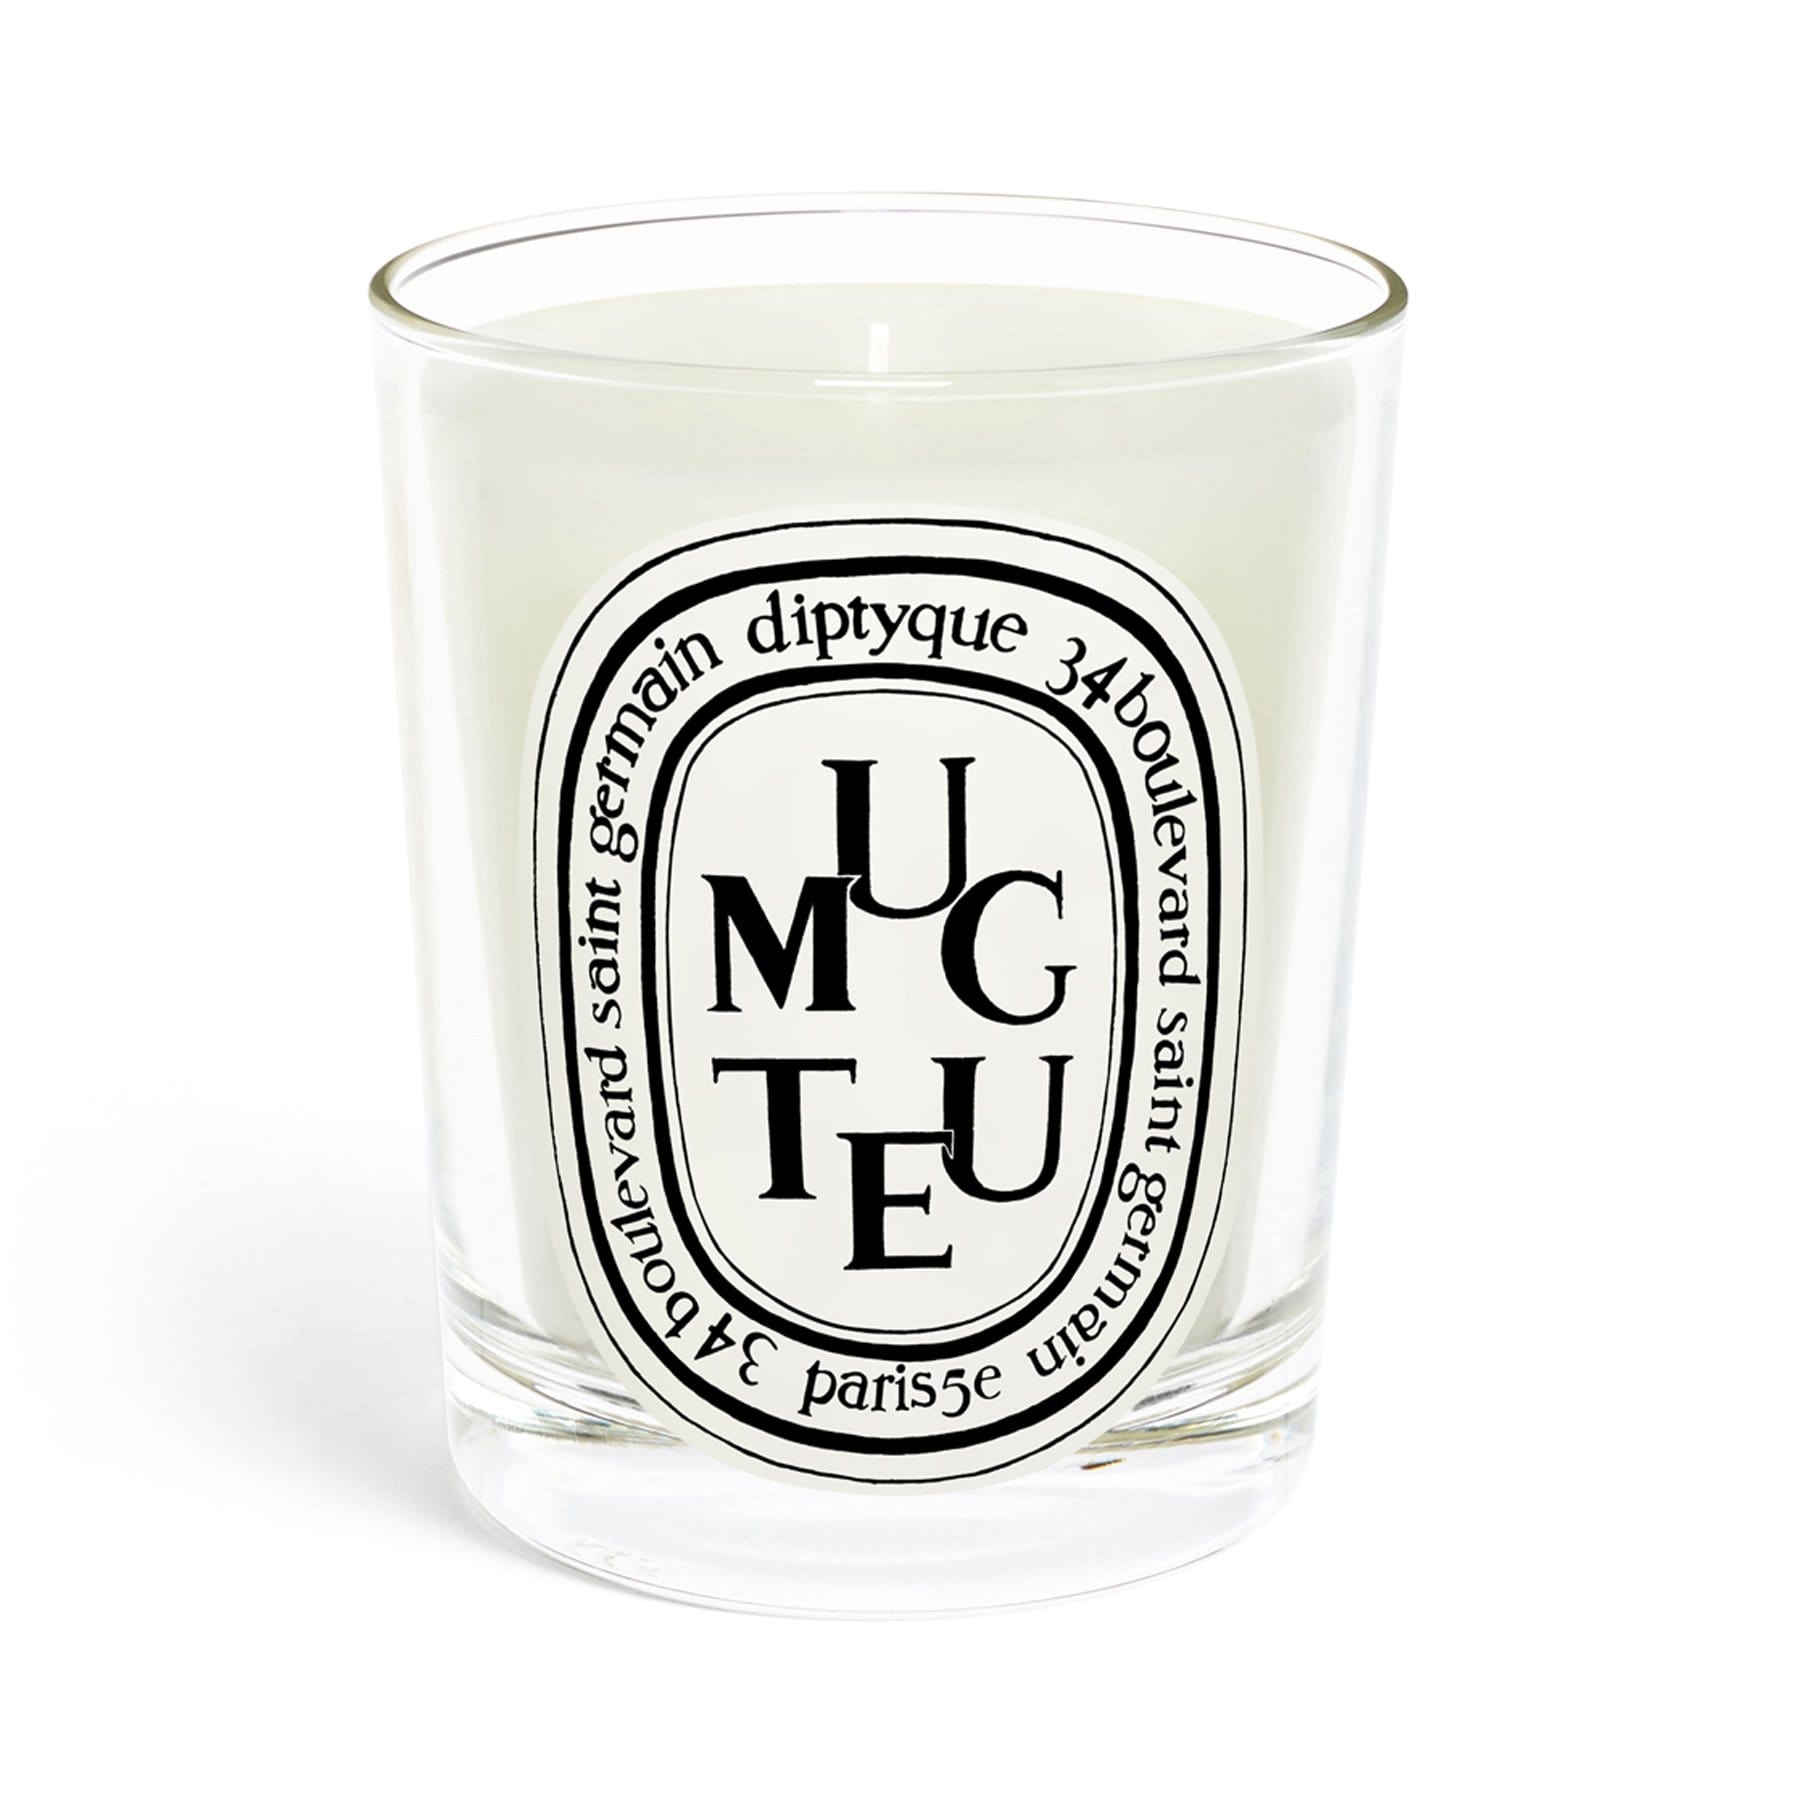 Muguet Diptyque Scented candle